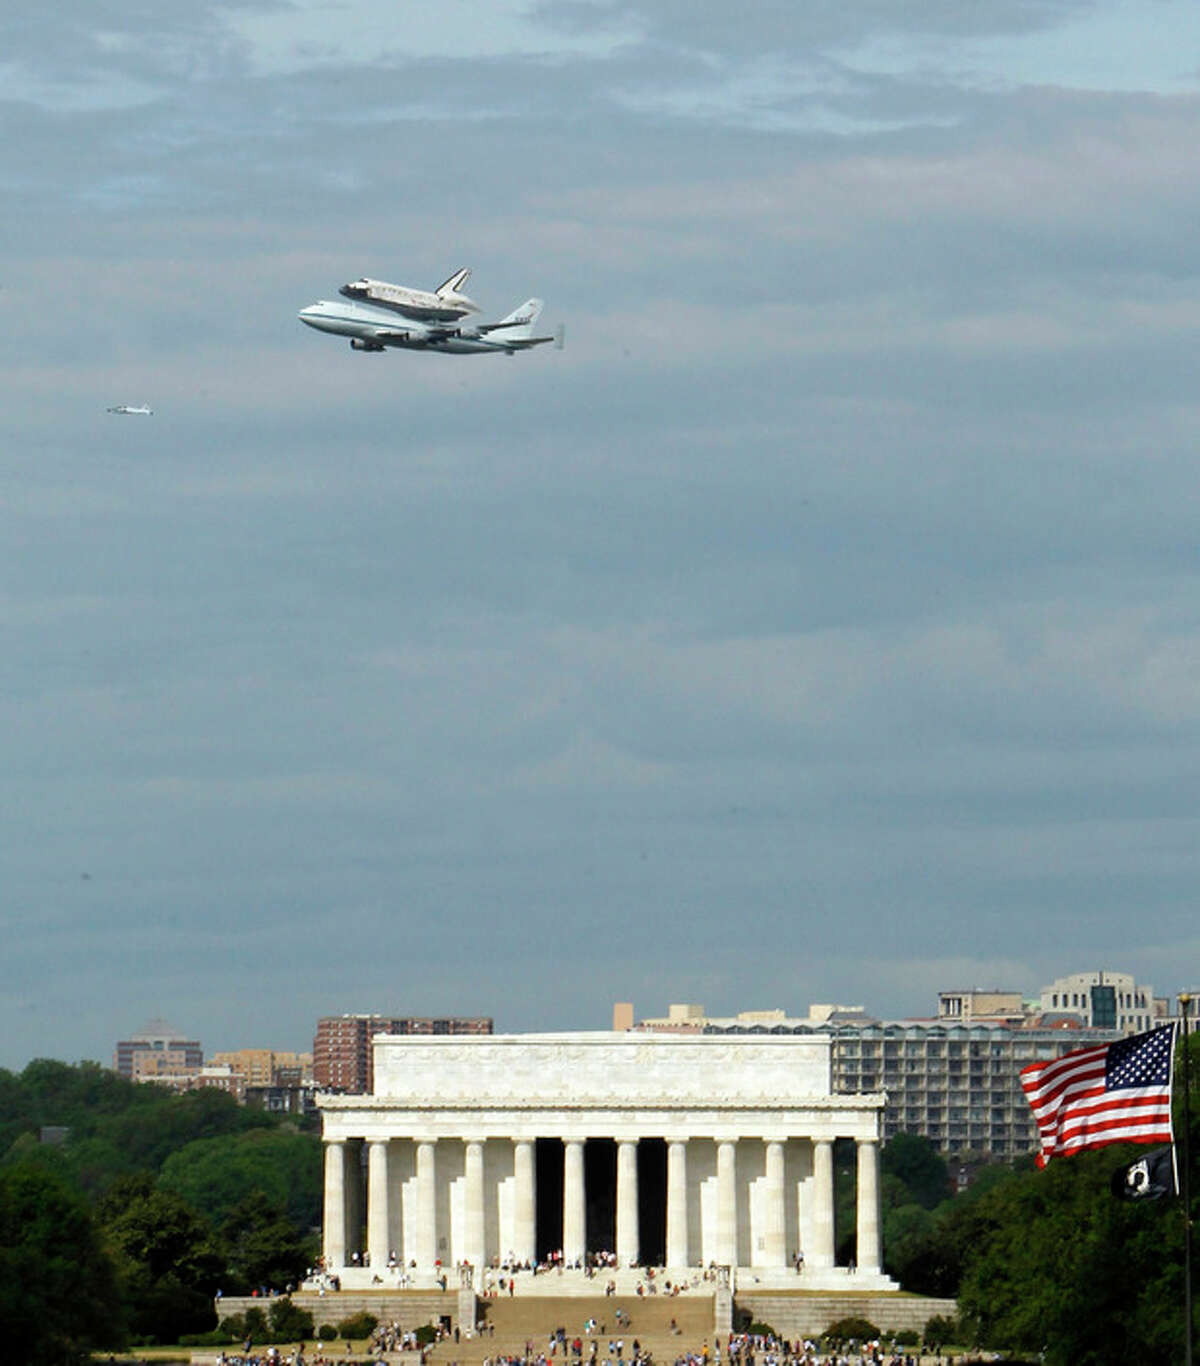 The Space Shuttle Discovery, mounted on the Shuttle Carrier Aircraft, flies over the Lincoln Memorial in Washington, Tuesday, April 17, 2012. Discovery is en route from Kennedy Space Center to the Smithsonian National Air and Space Museum Udvar/Hazy Center at Dulles International Airport. (AP Photo/Ann Heisenfelt)